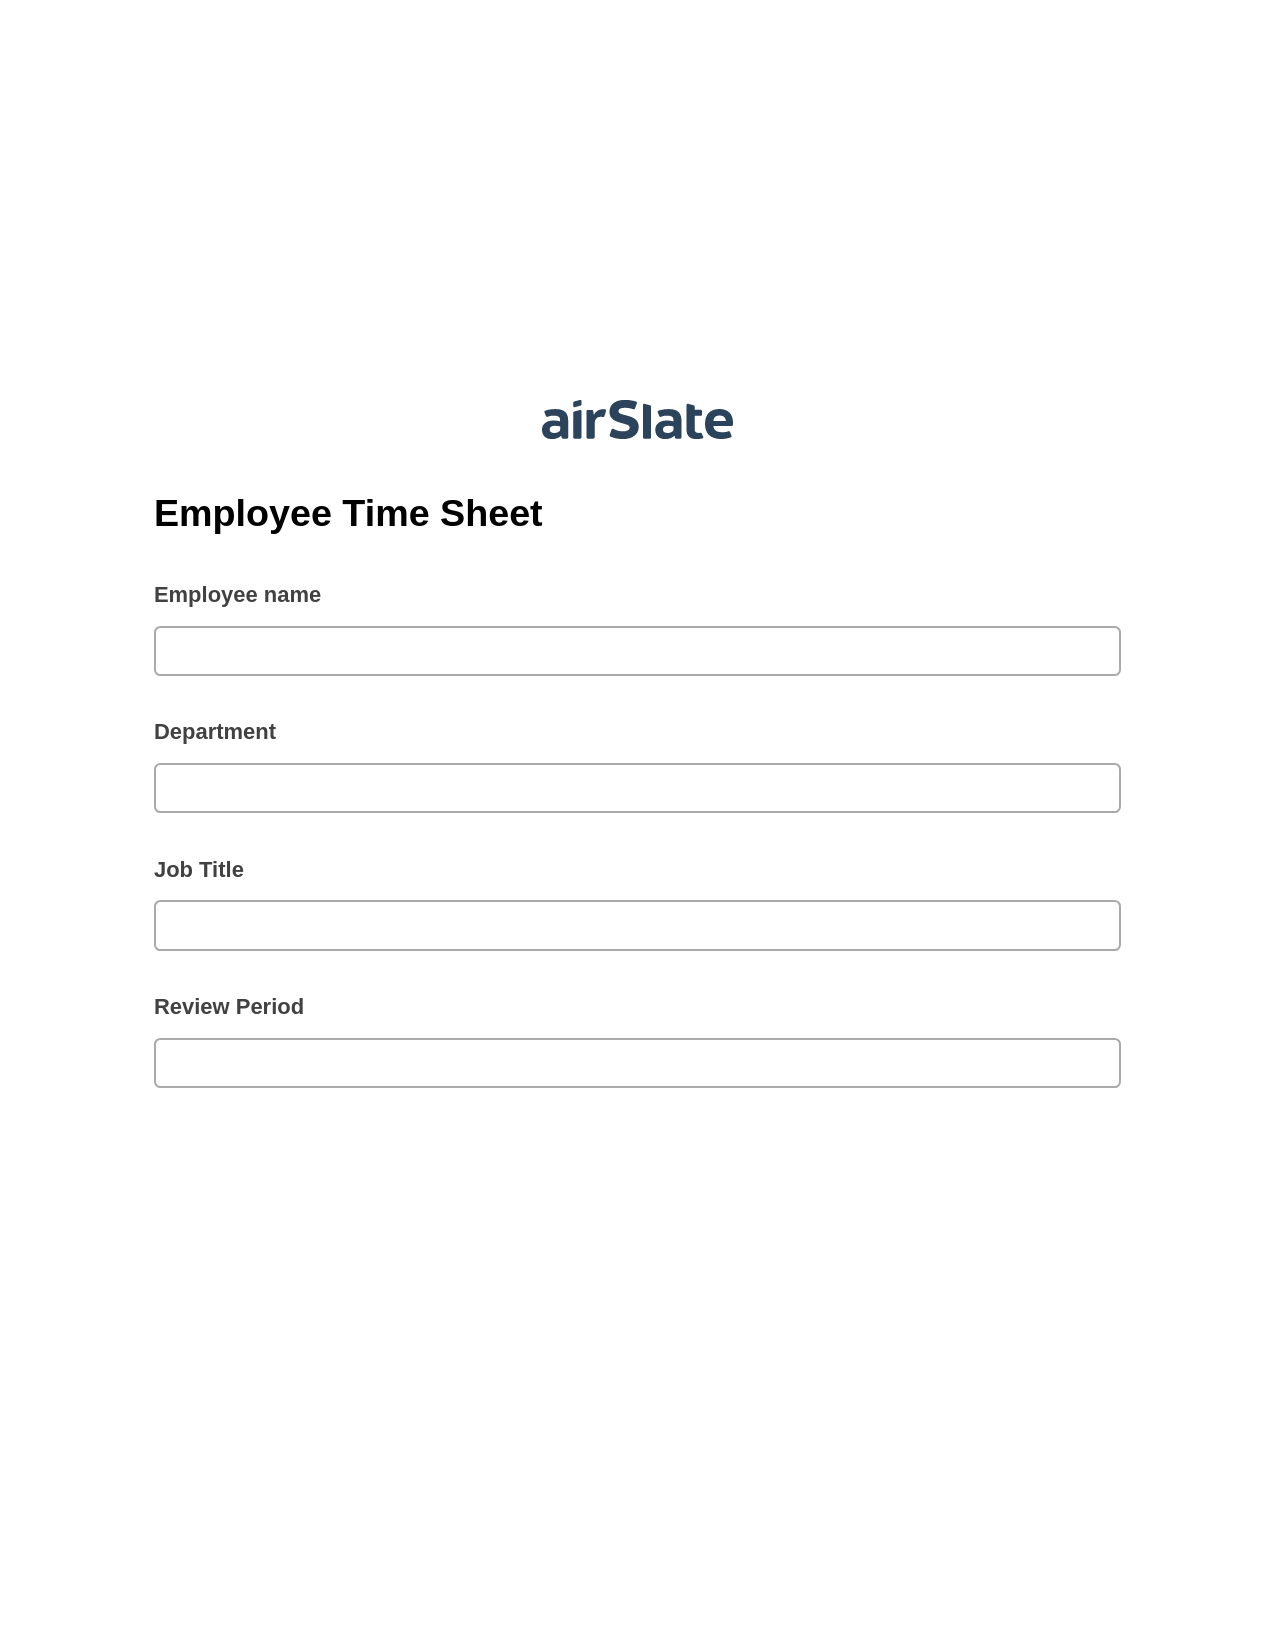 Employee Time Sheet Pre-fill Document Bot, Create Salesforce Records Bot, Export to NetSuite Bot